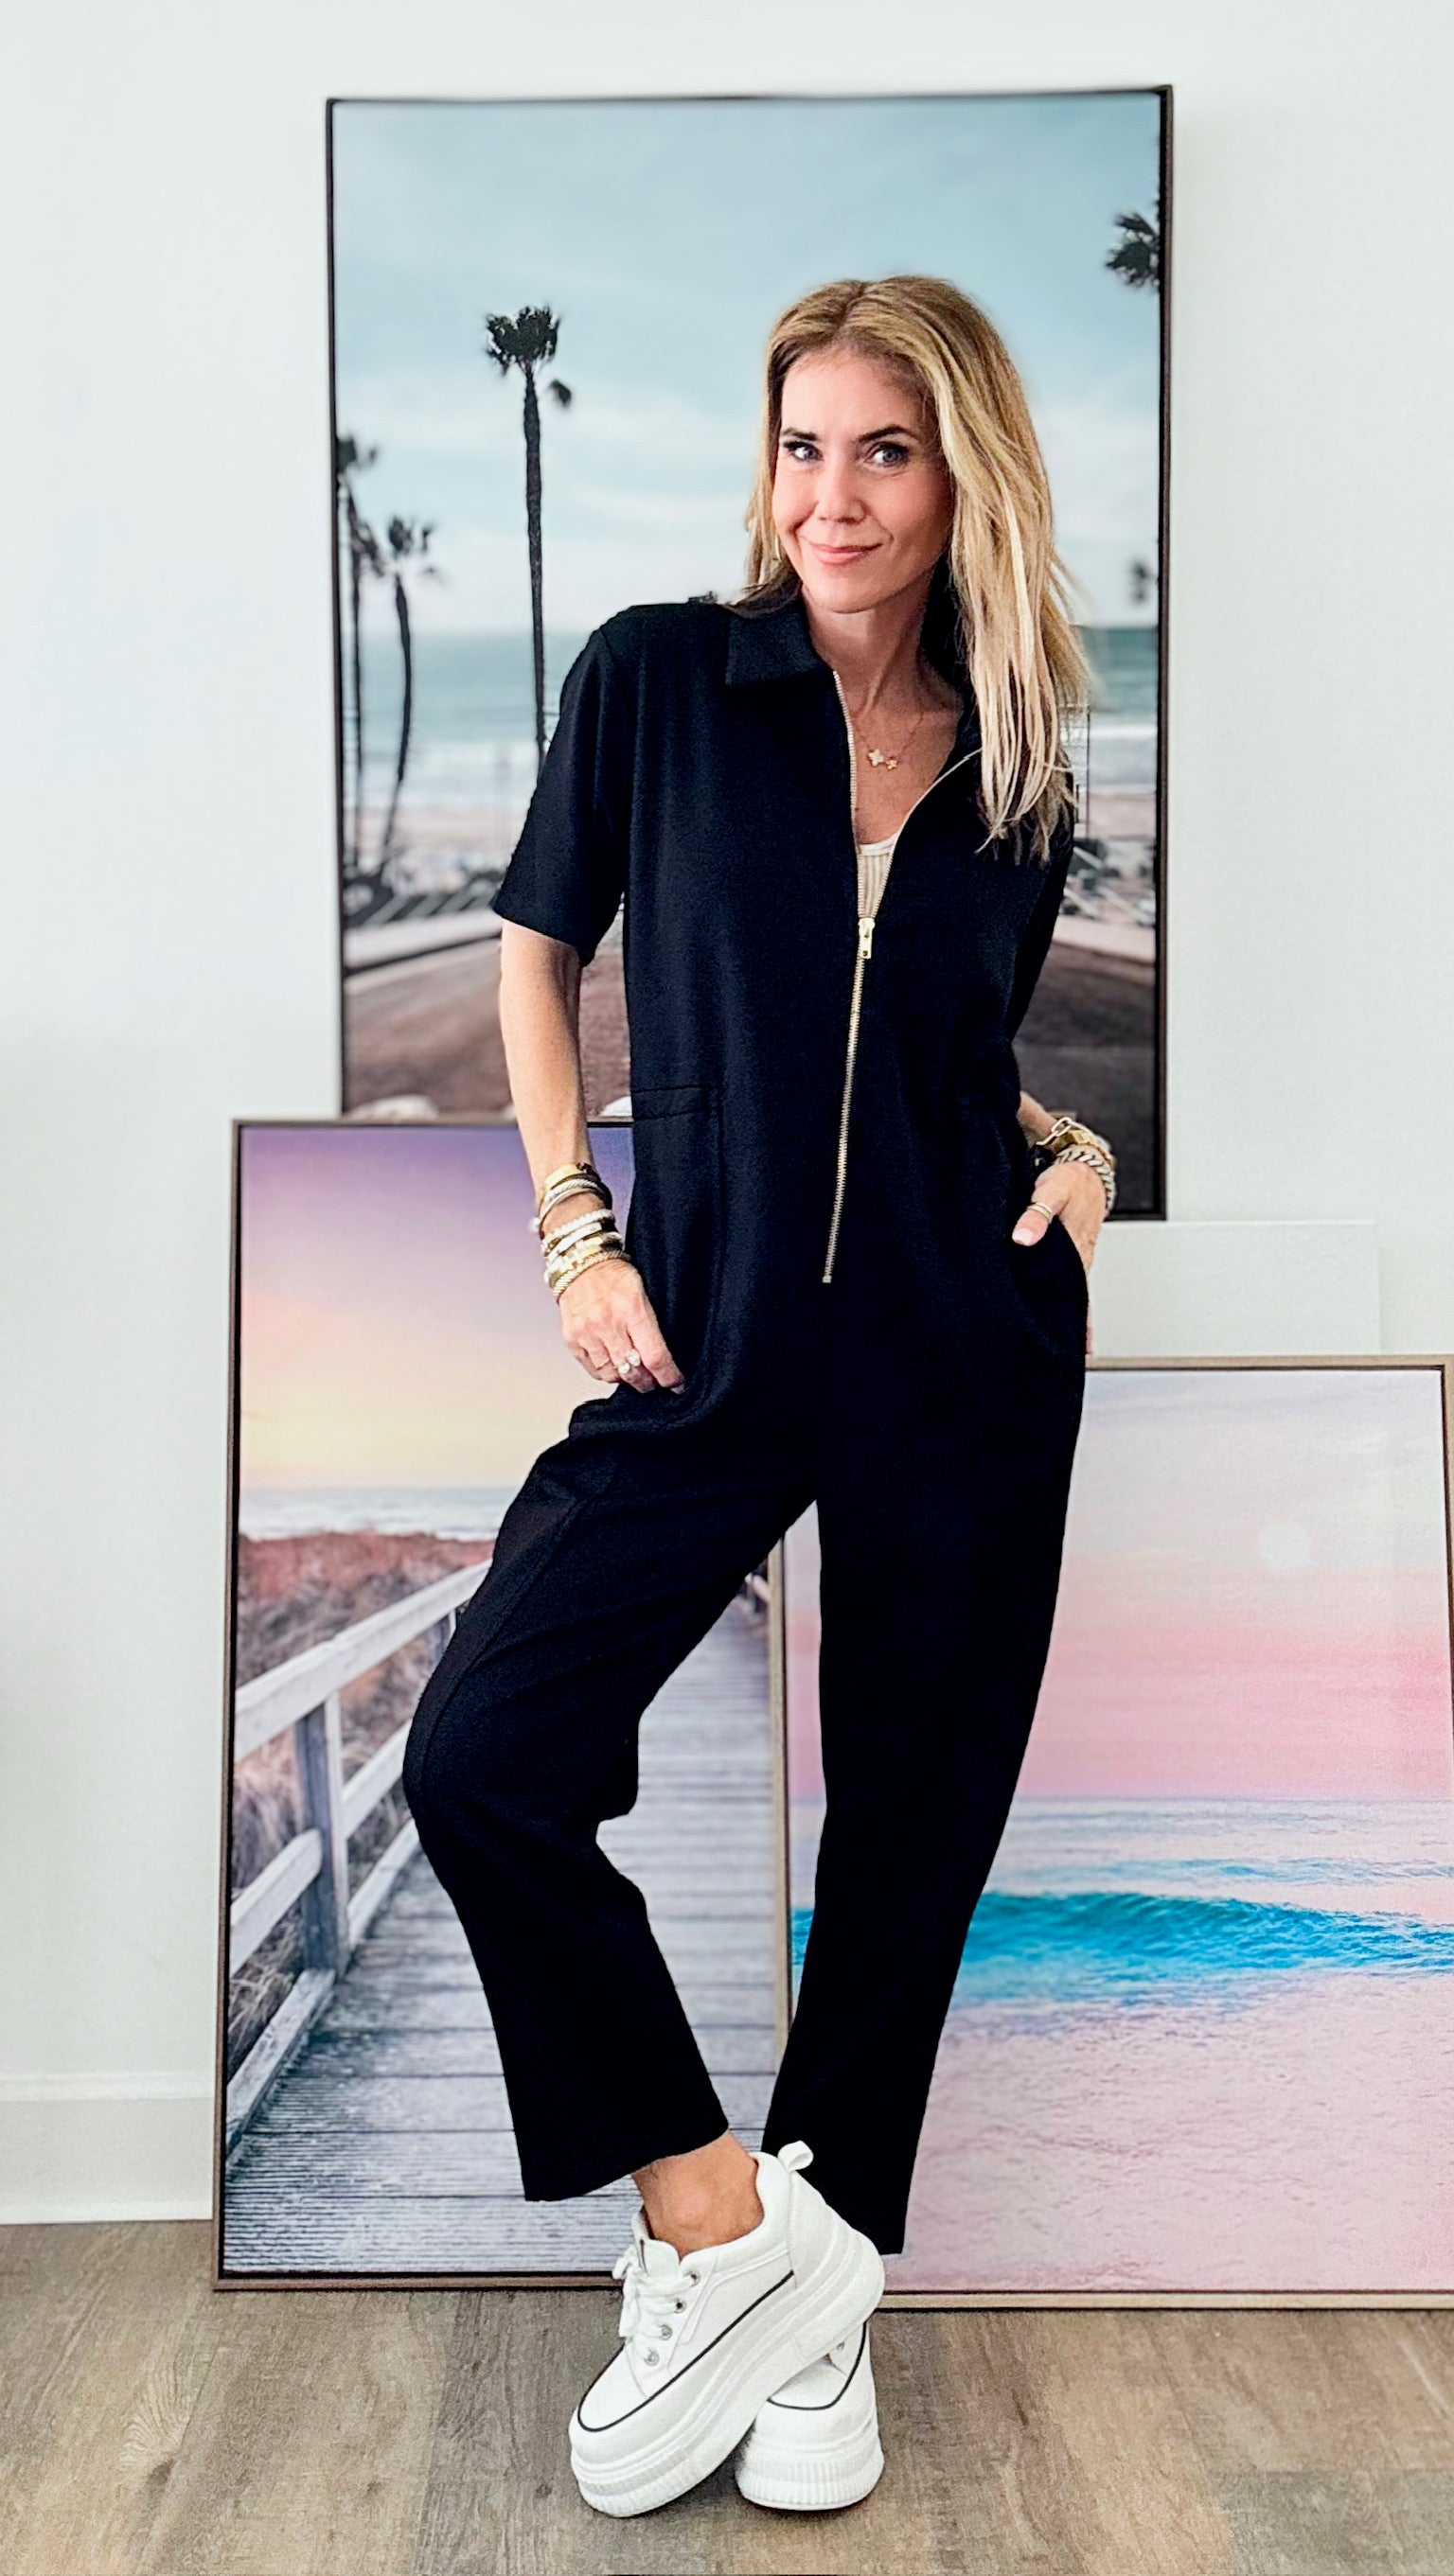 Butter Modal Zip Up Jumpsuit-Black-200 Dresses/Jumpsuits/Rompers-Before You-Coastal Bloom Boutique, find the trendiest versions of the popular styles and looks Located in Indialantic, FL